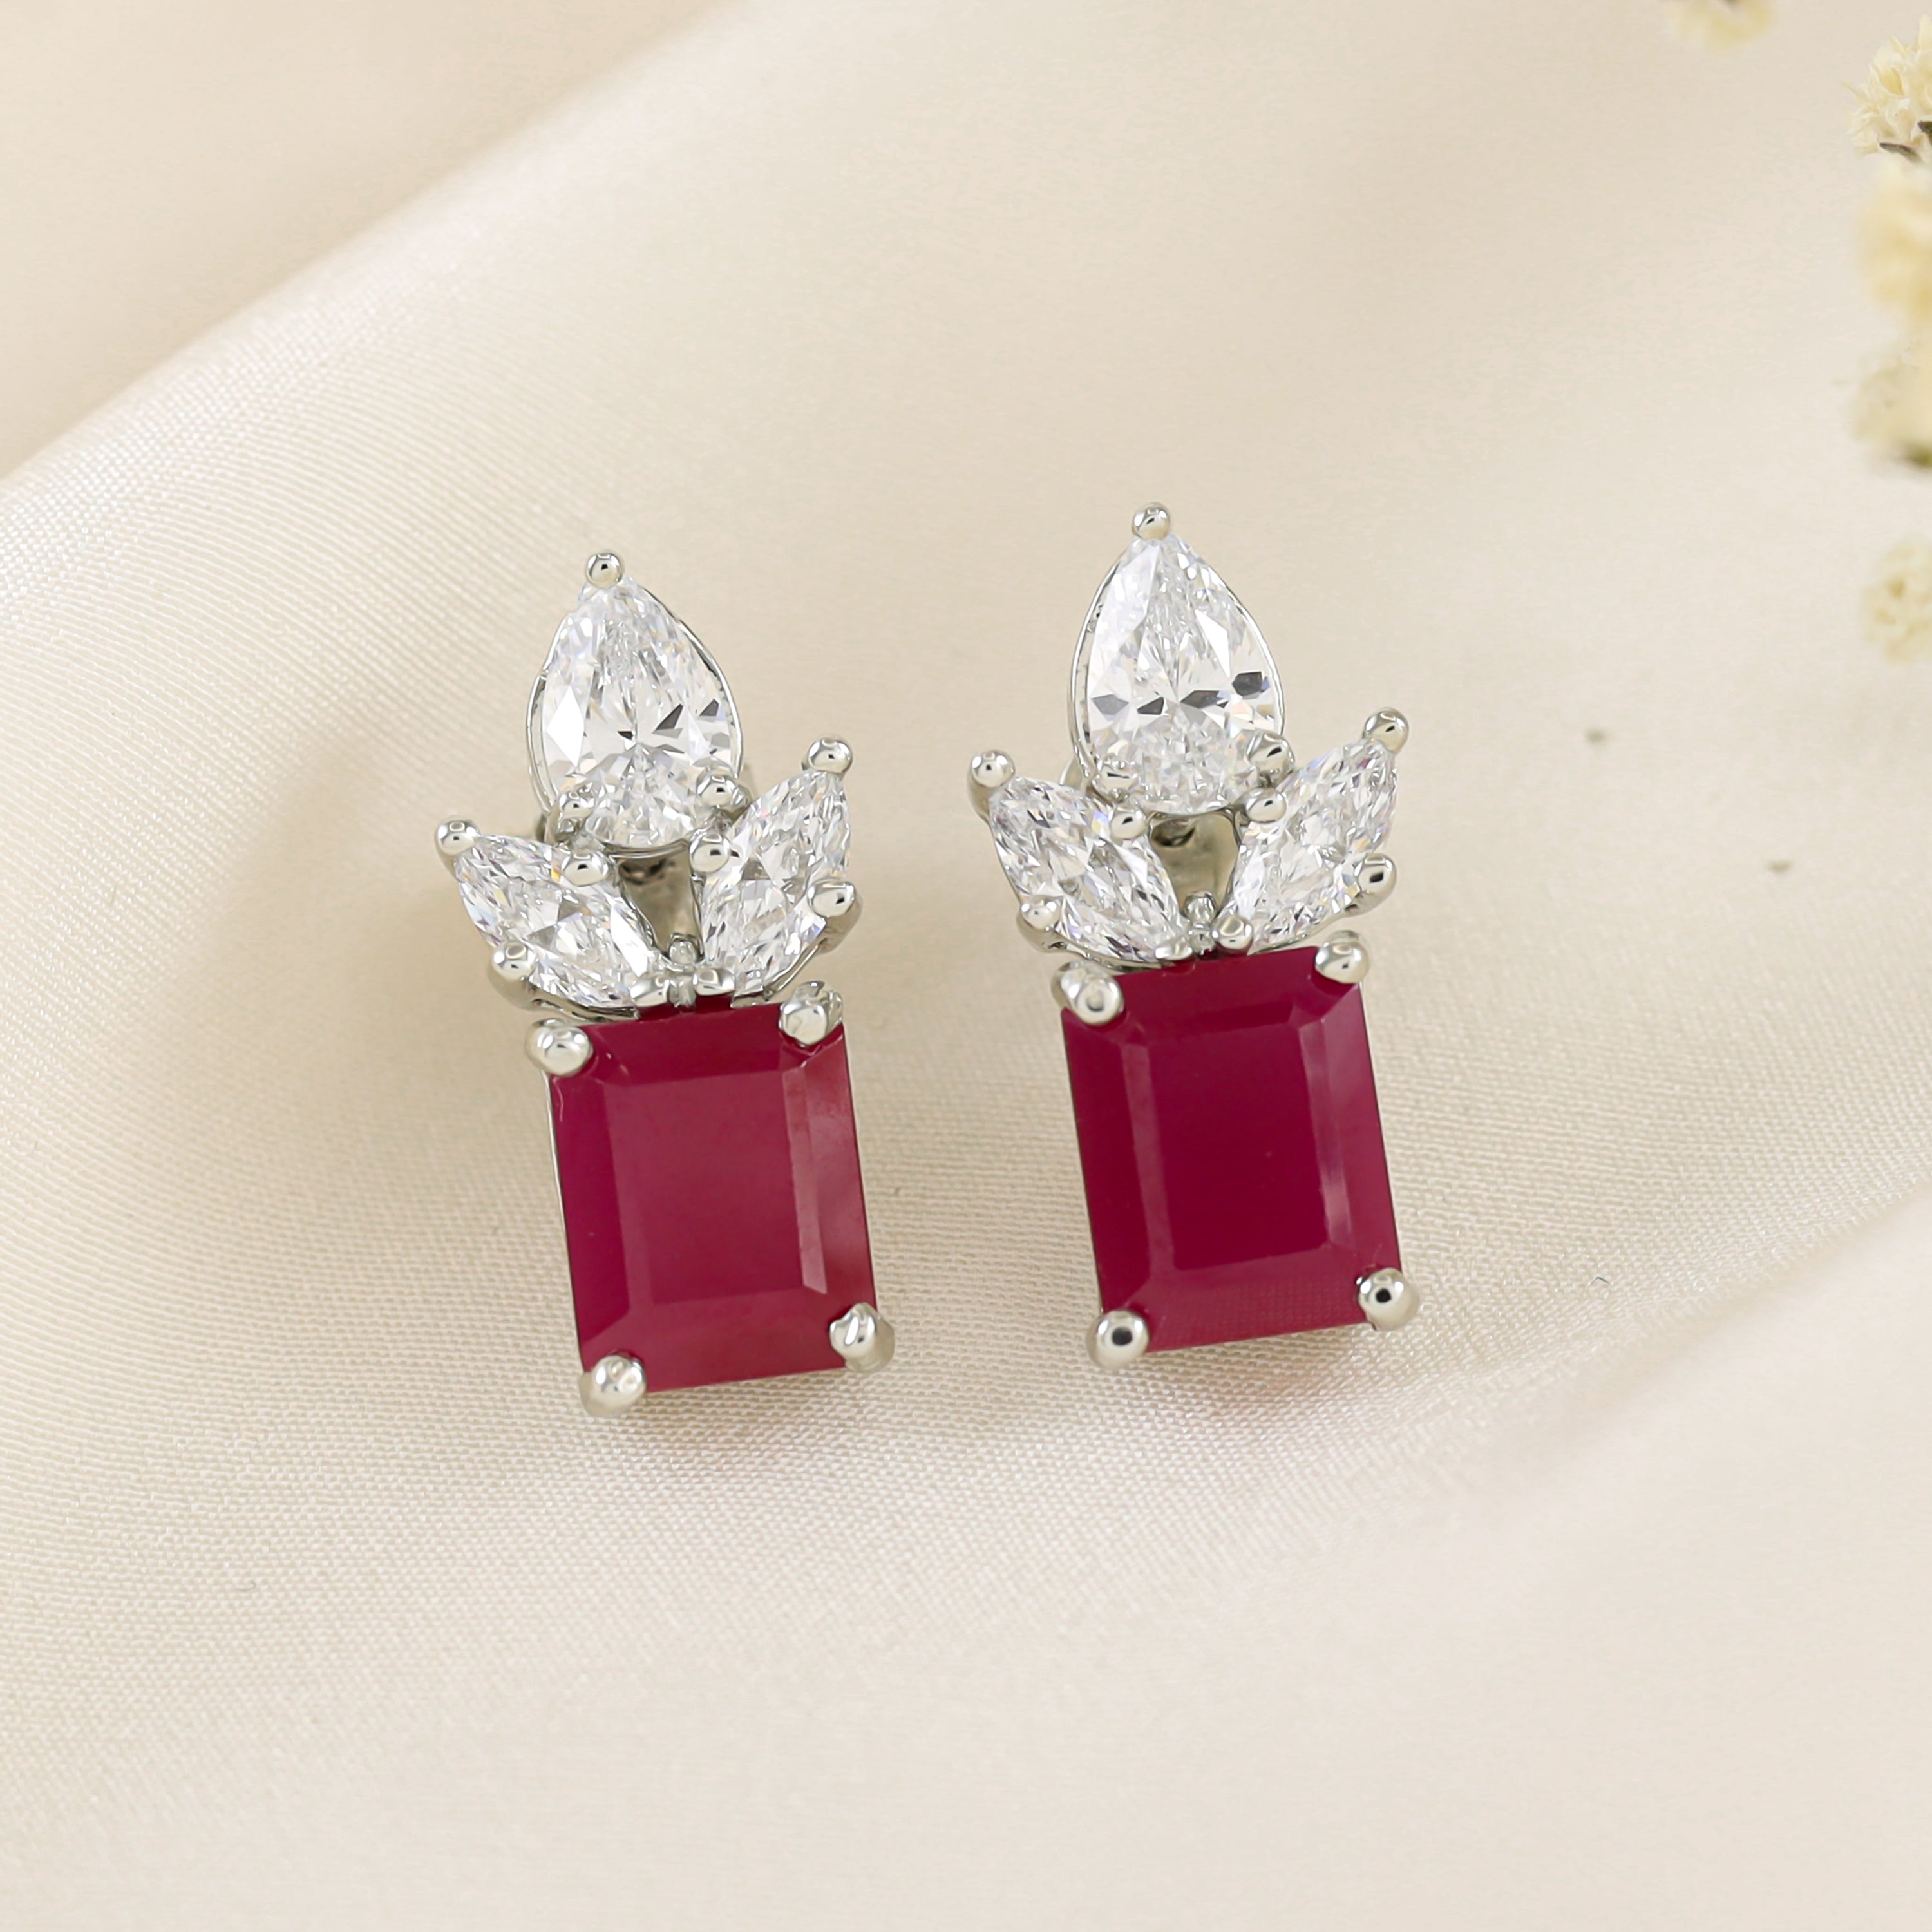 Earrings Swarovski drops siam red – Jewels with Flair